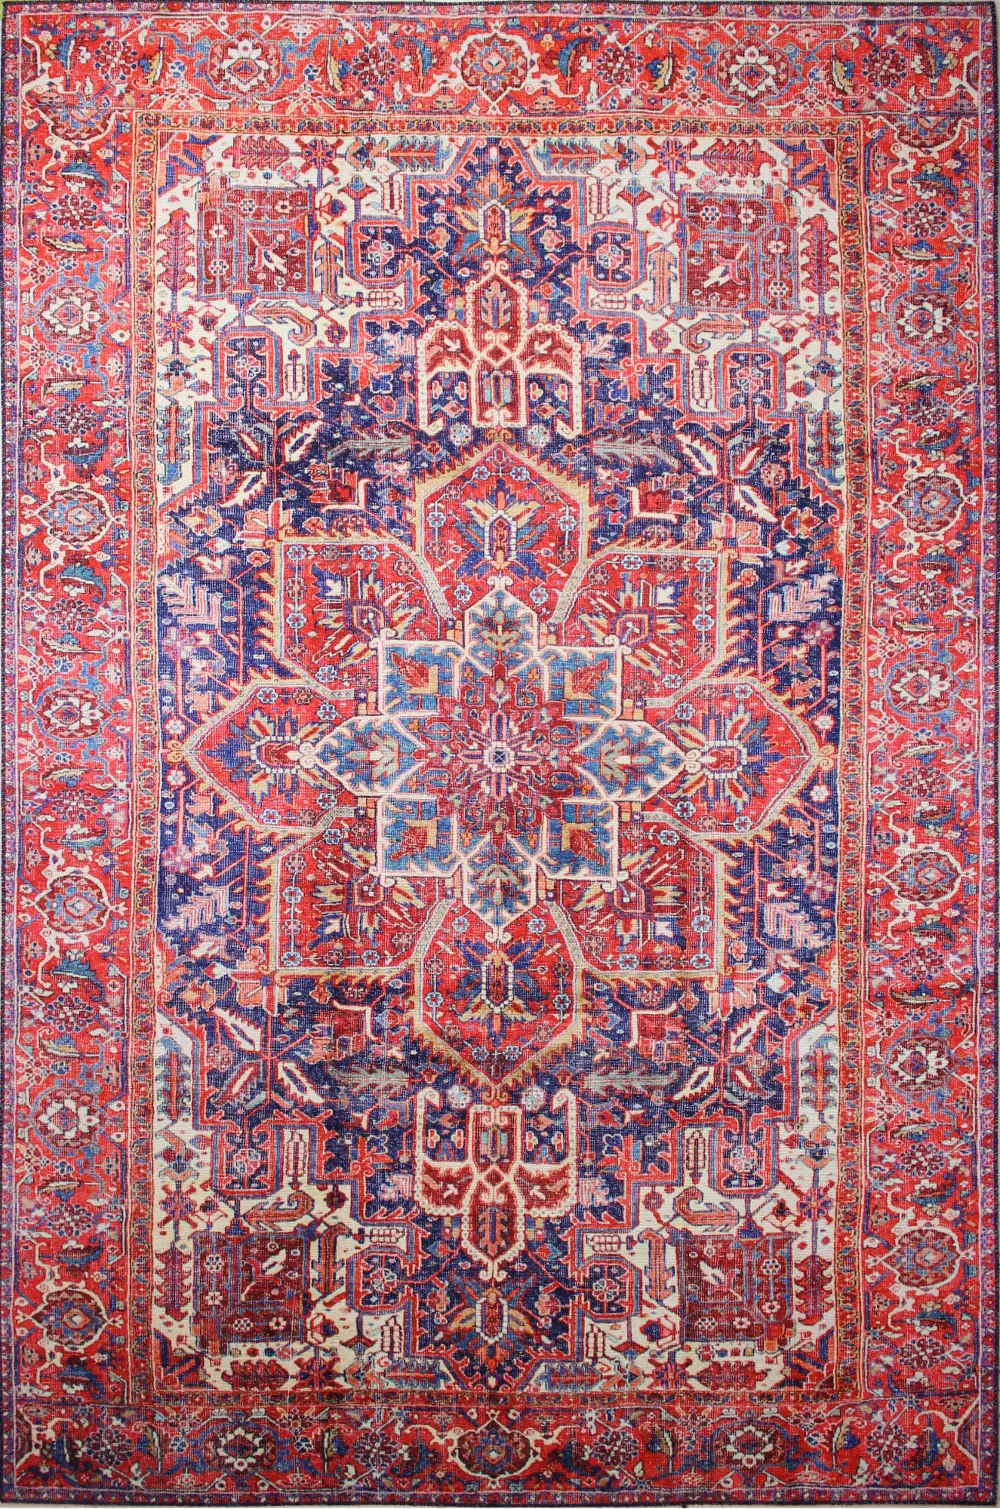 I166-DKBL-76X96-NR10 8 x 10 Large Traditional Zacharie Blue and Red Area Rug - Impressions-1